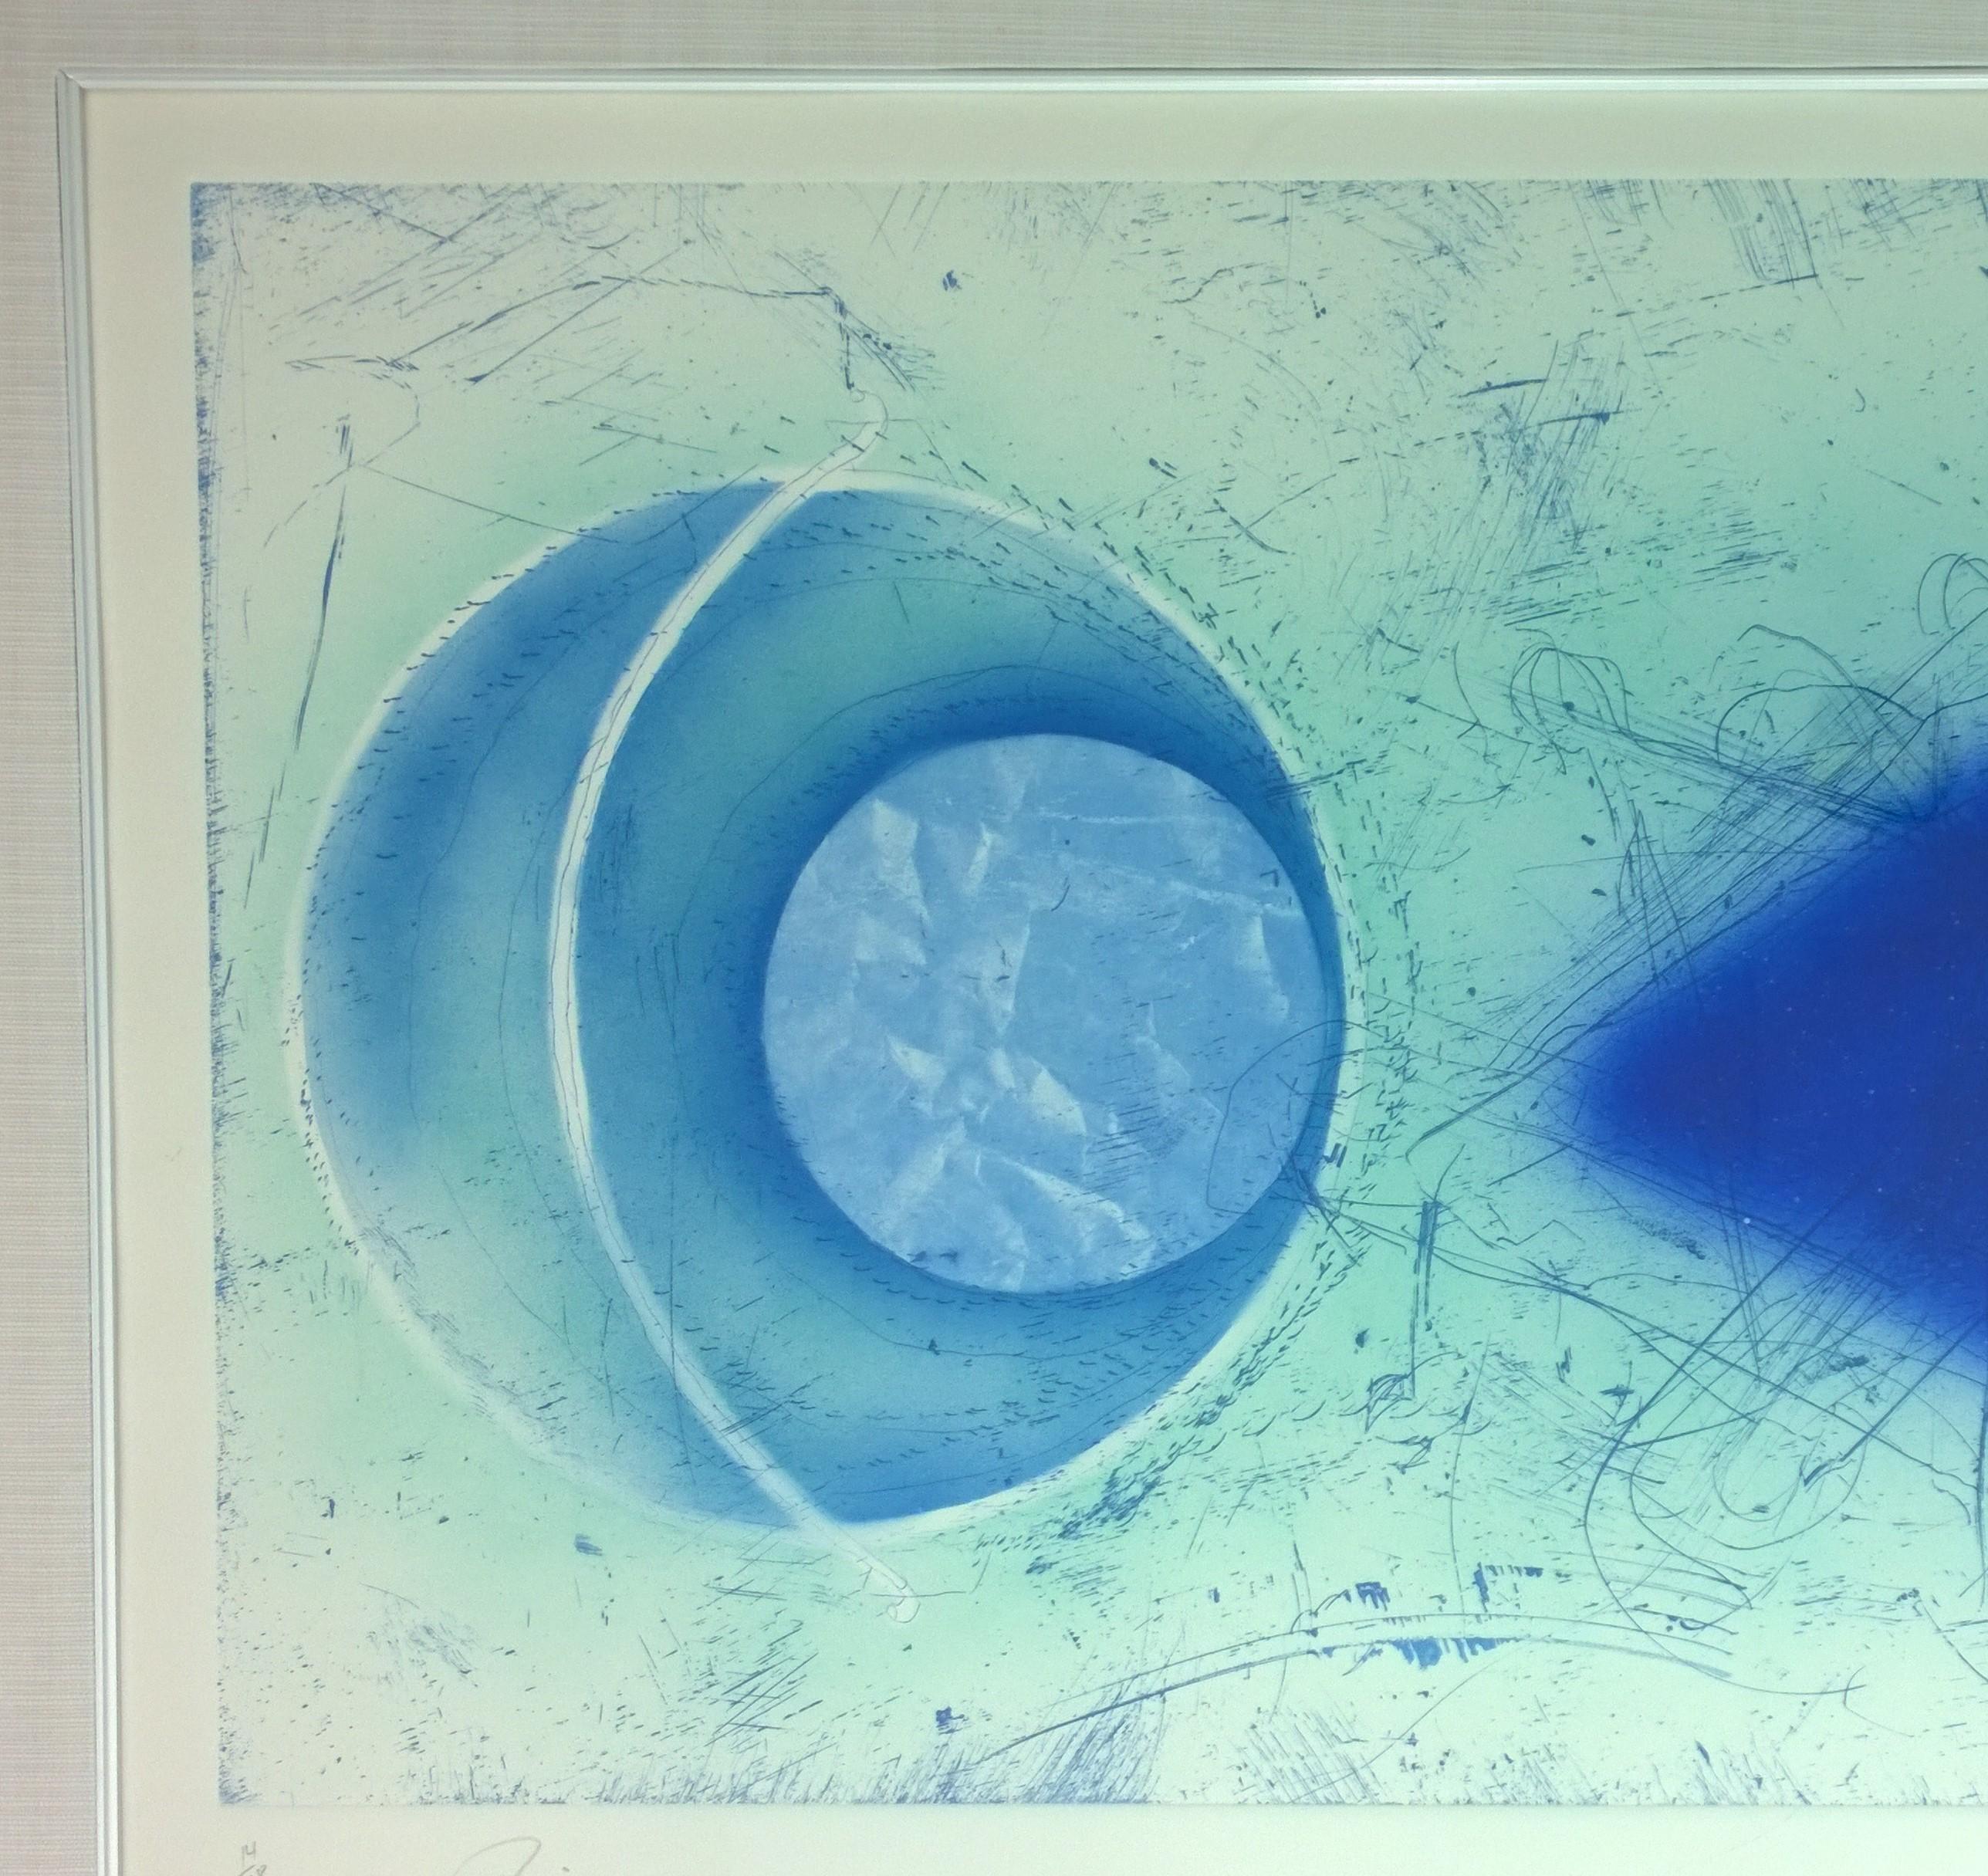 Blue & White J. Rosenquist Signed & Numbered Photo-Etching Aquatint, Rinse, 1978 For Sale 1